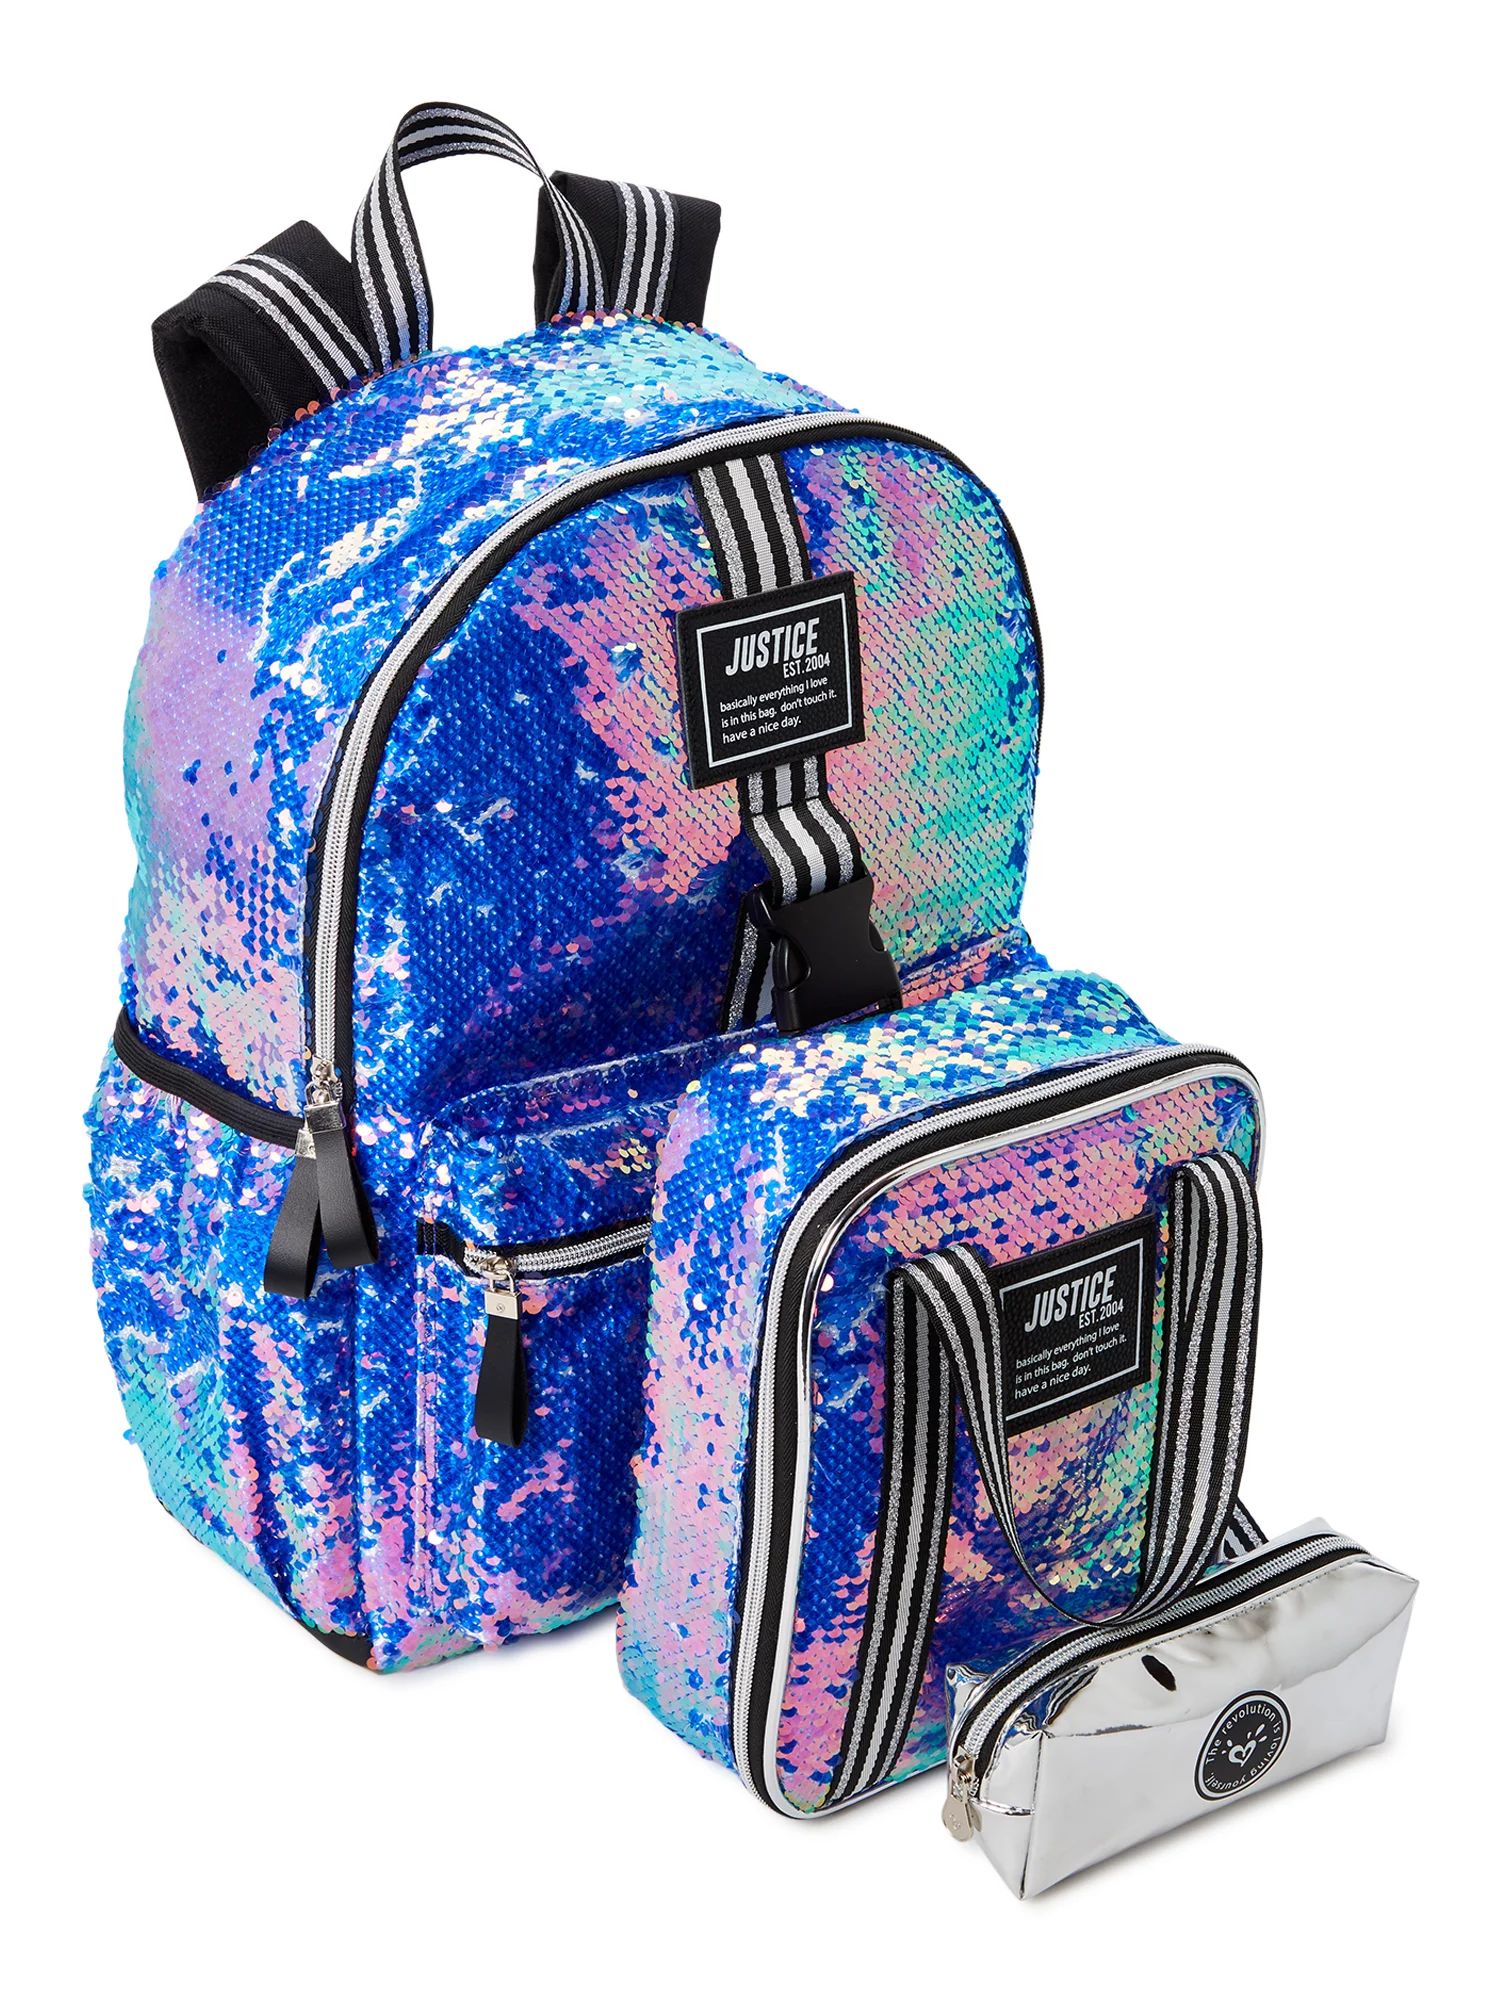 Justice Girls Backpack, Lunch Tote and Pencil Case, 3-Piece Set Multi-Color Sequin | Walmart (US)